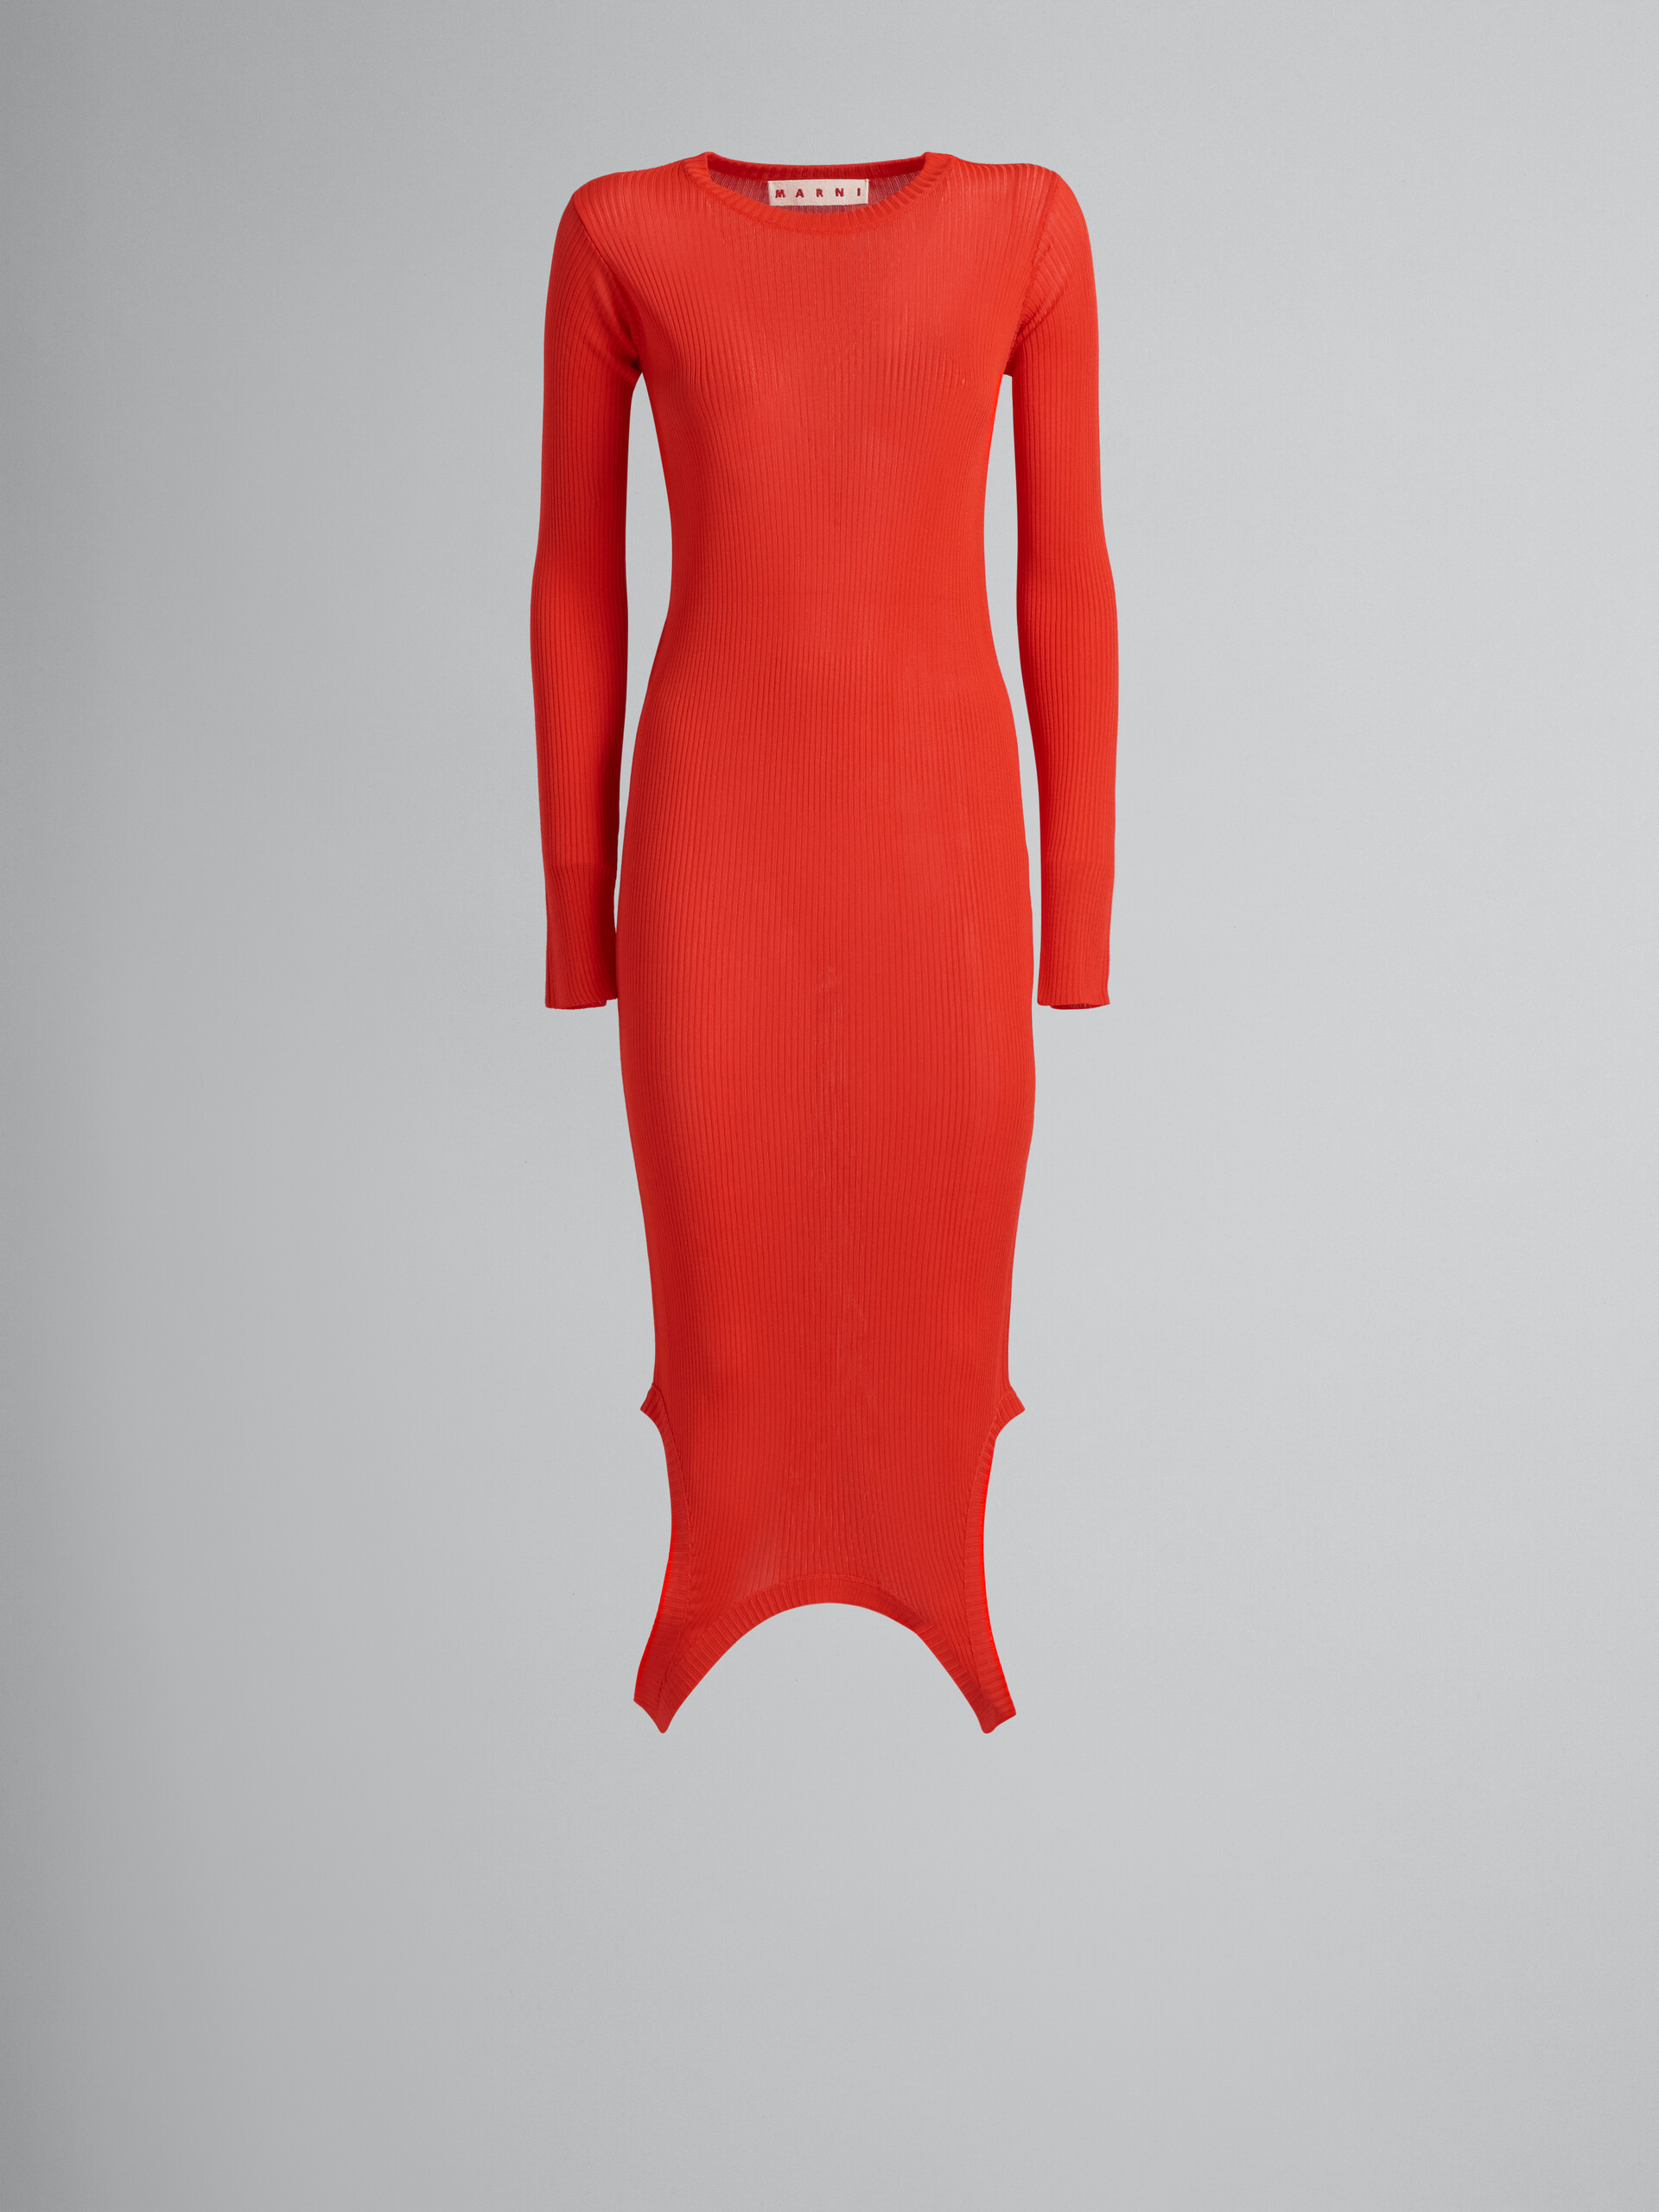 Red ribbed dress with press buttons - Pullovers - Image 1